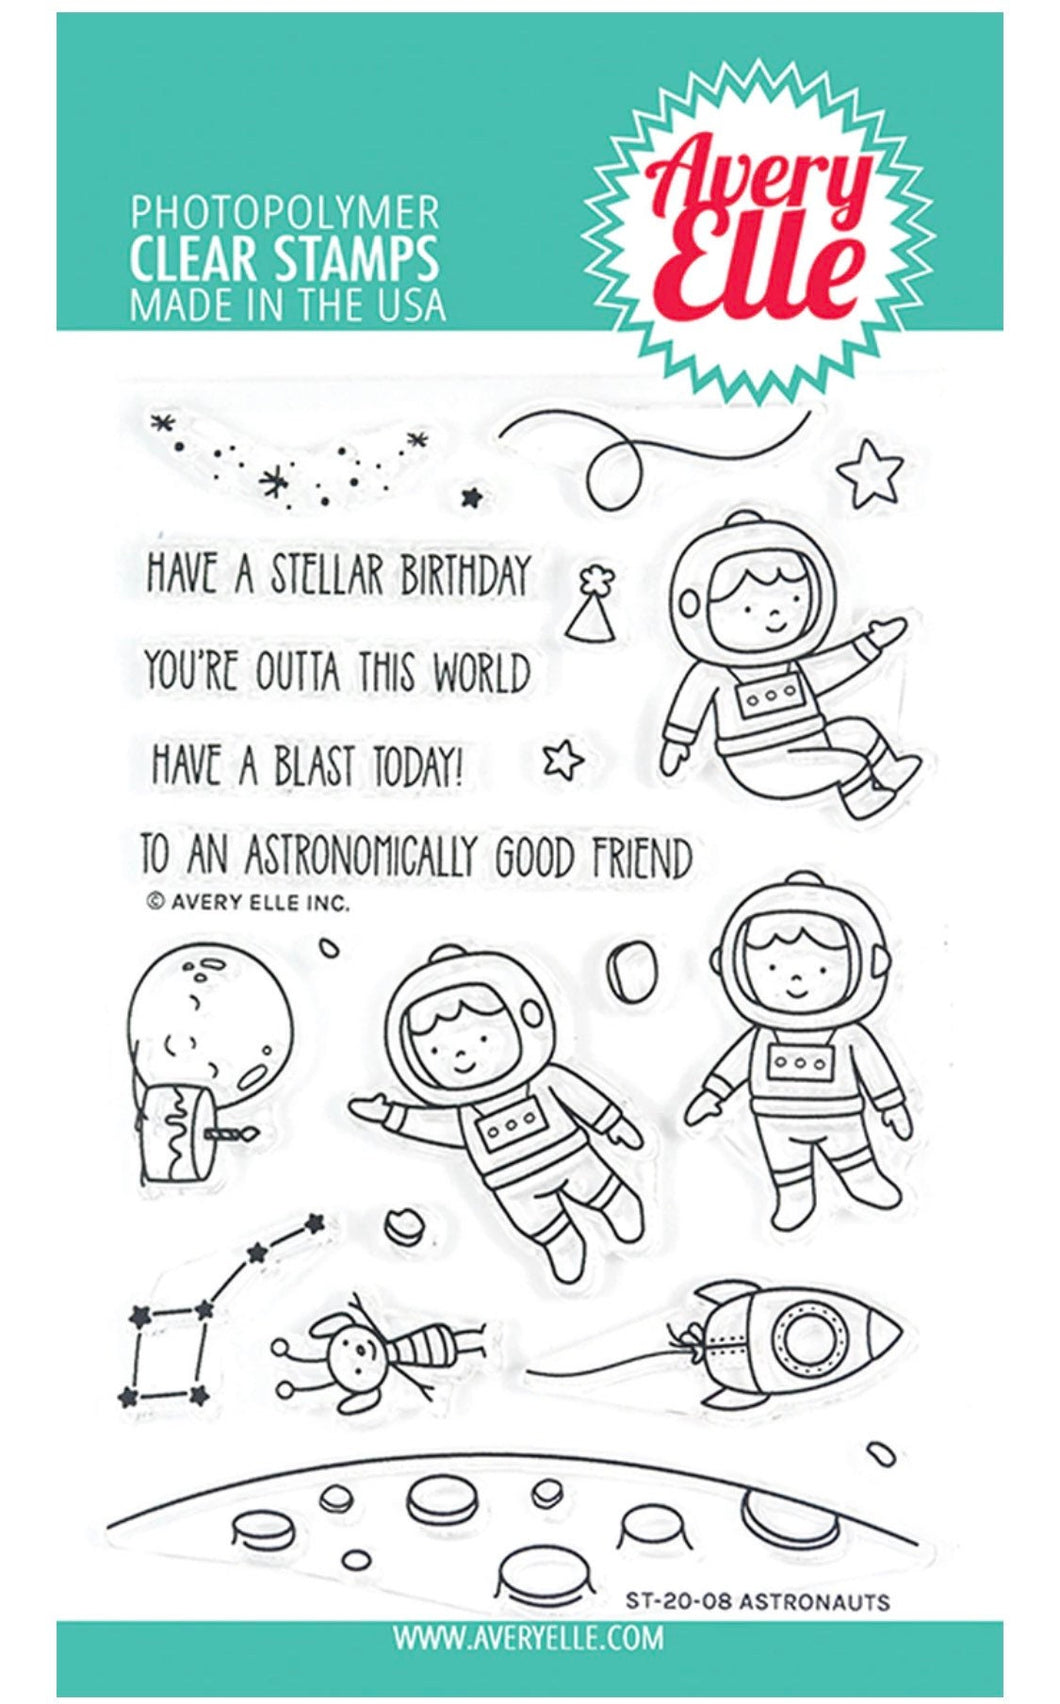 Avery Elle Clear Photopolymer Rubber Stamp Set - Astronaut